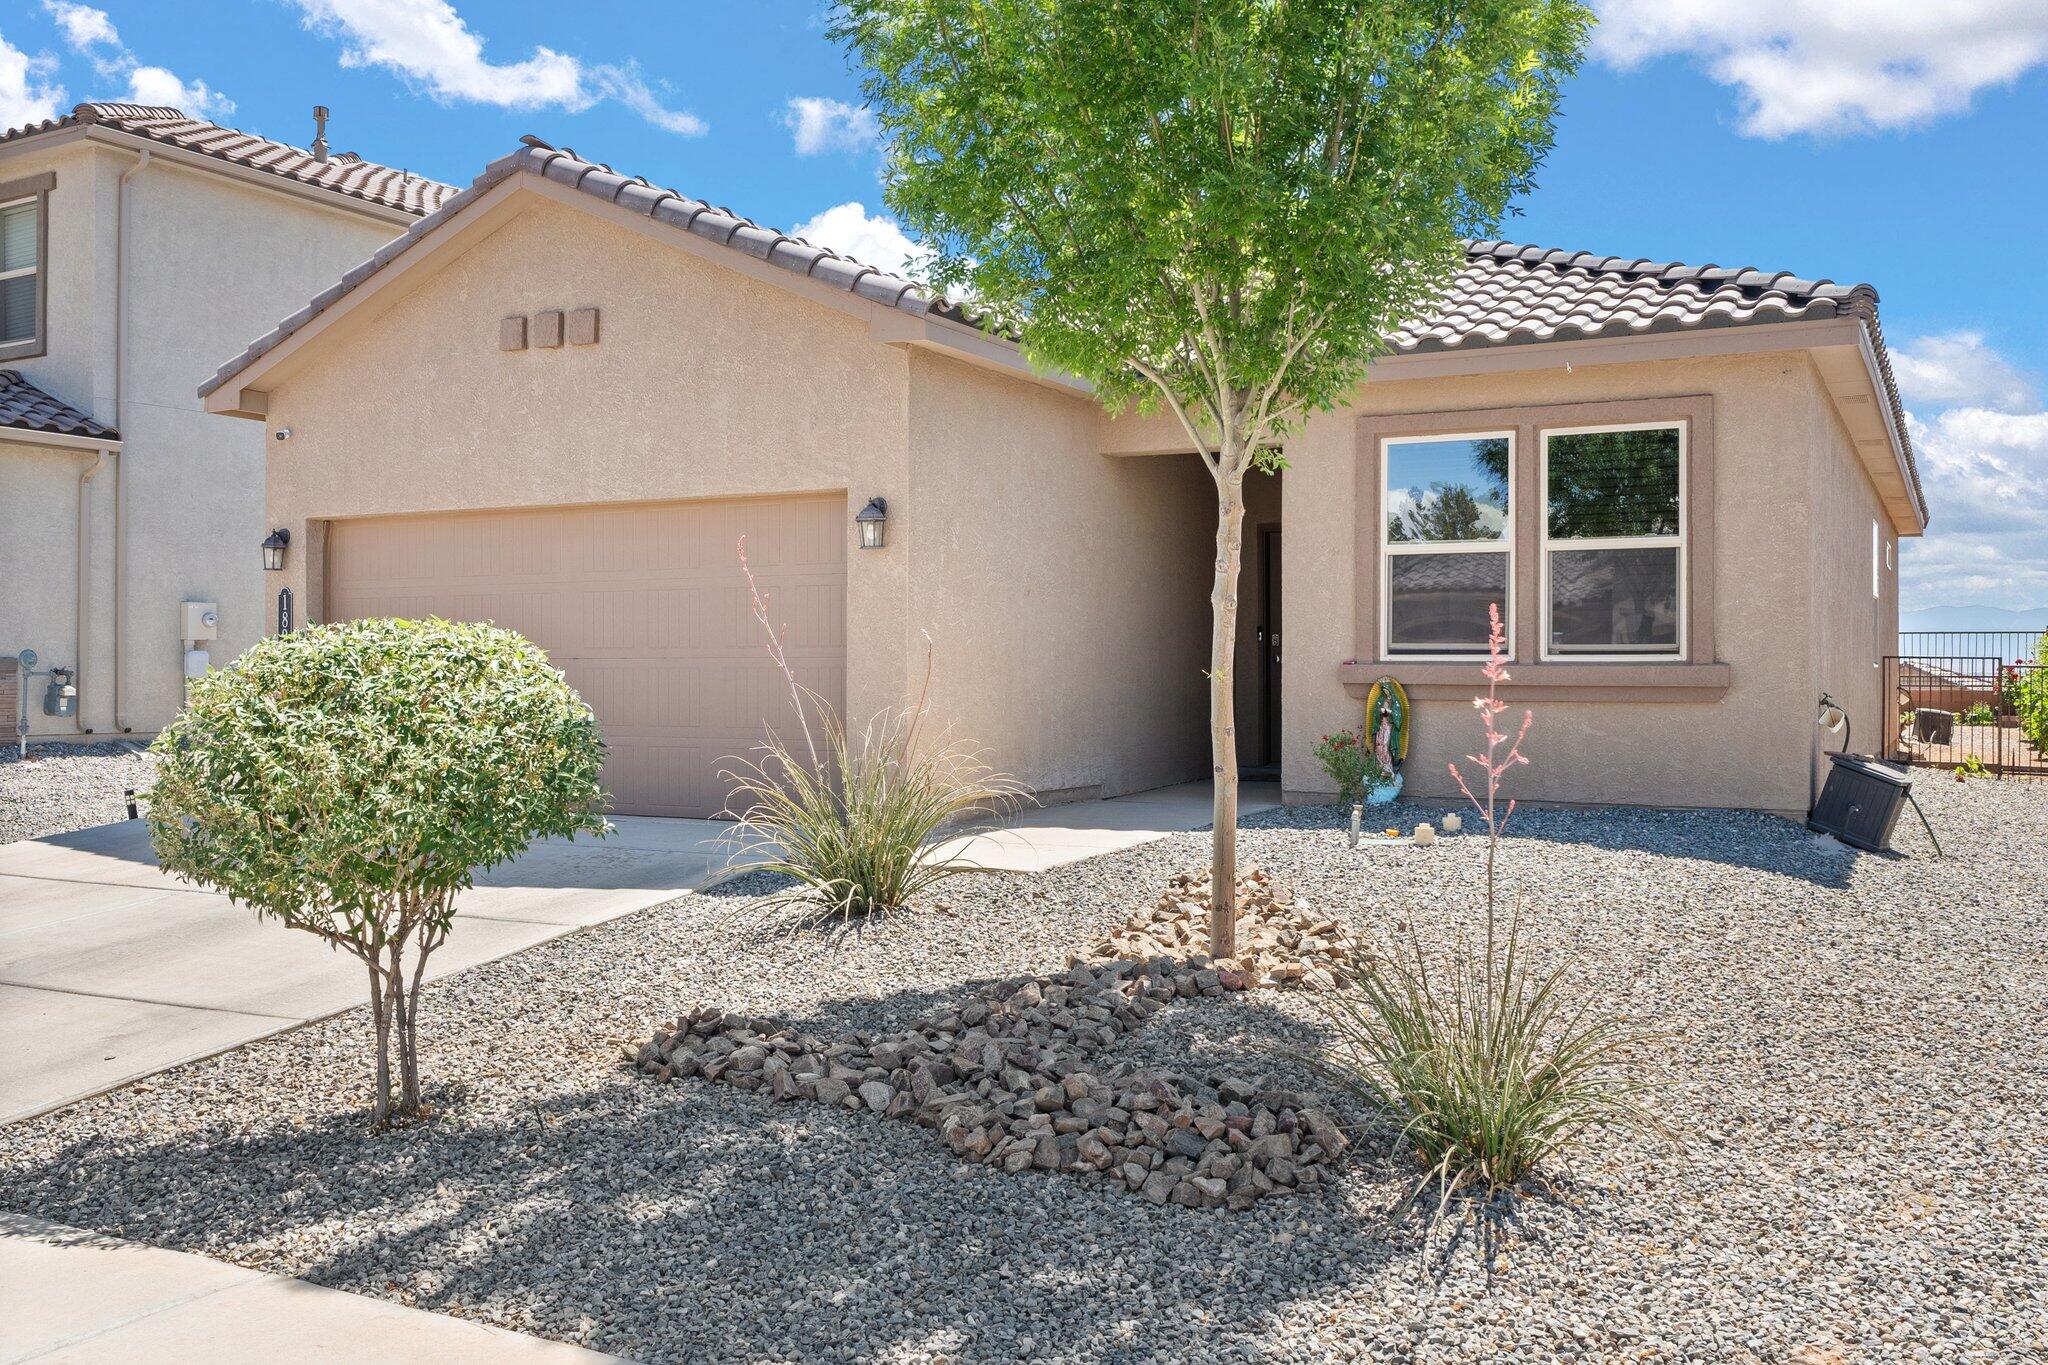 Welcome home! This 3-bedroom 2 bath house offers an open living room area combined with the kitchen. Separate primary bedroom and bathroom. 2 other bedrooms near the entry way with a bathroom to share. Enjoy the Manzano Mountain views from your own backyard.